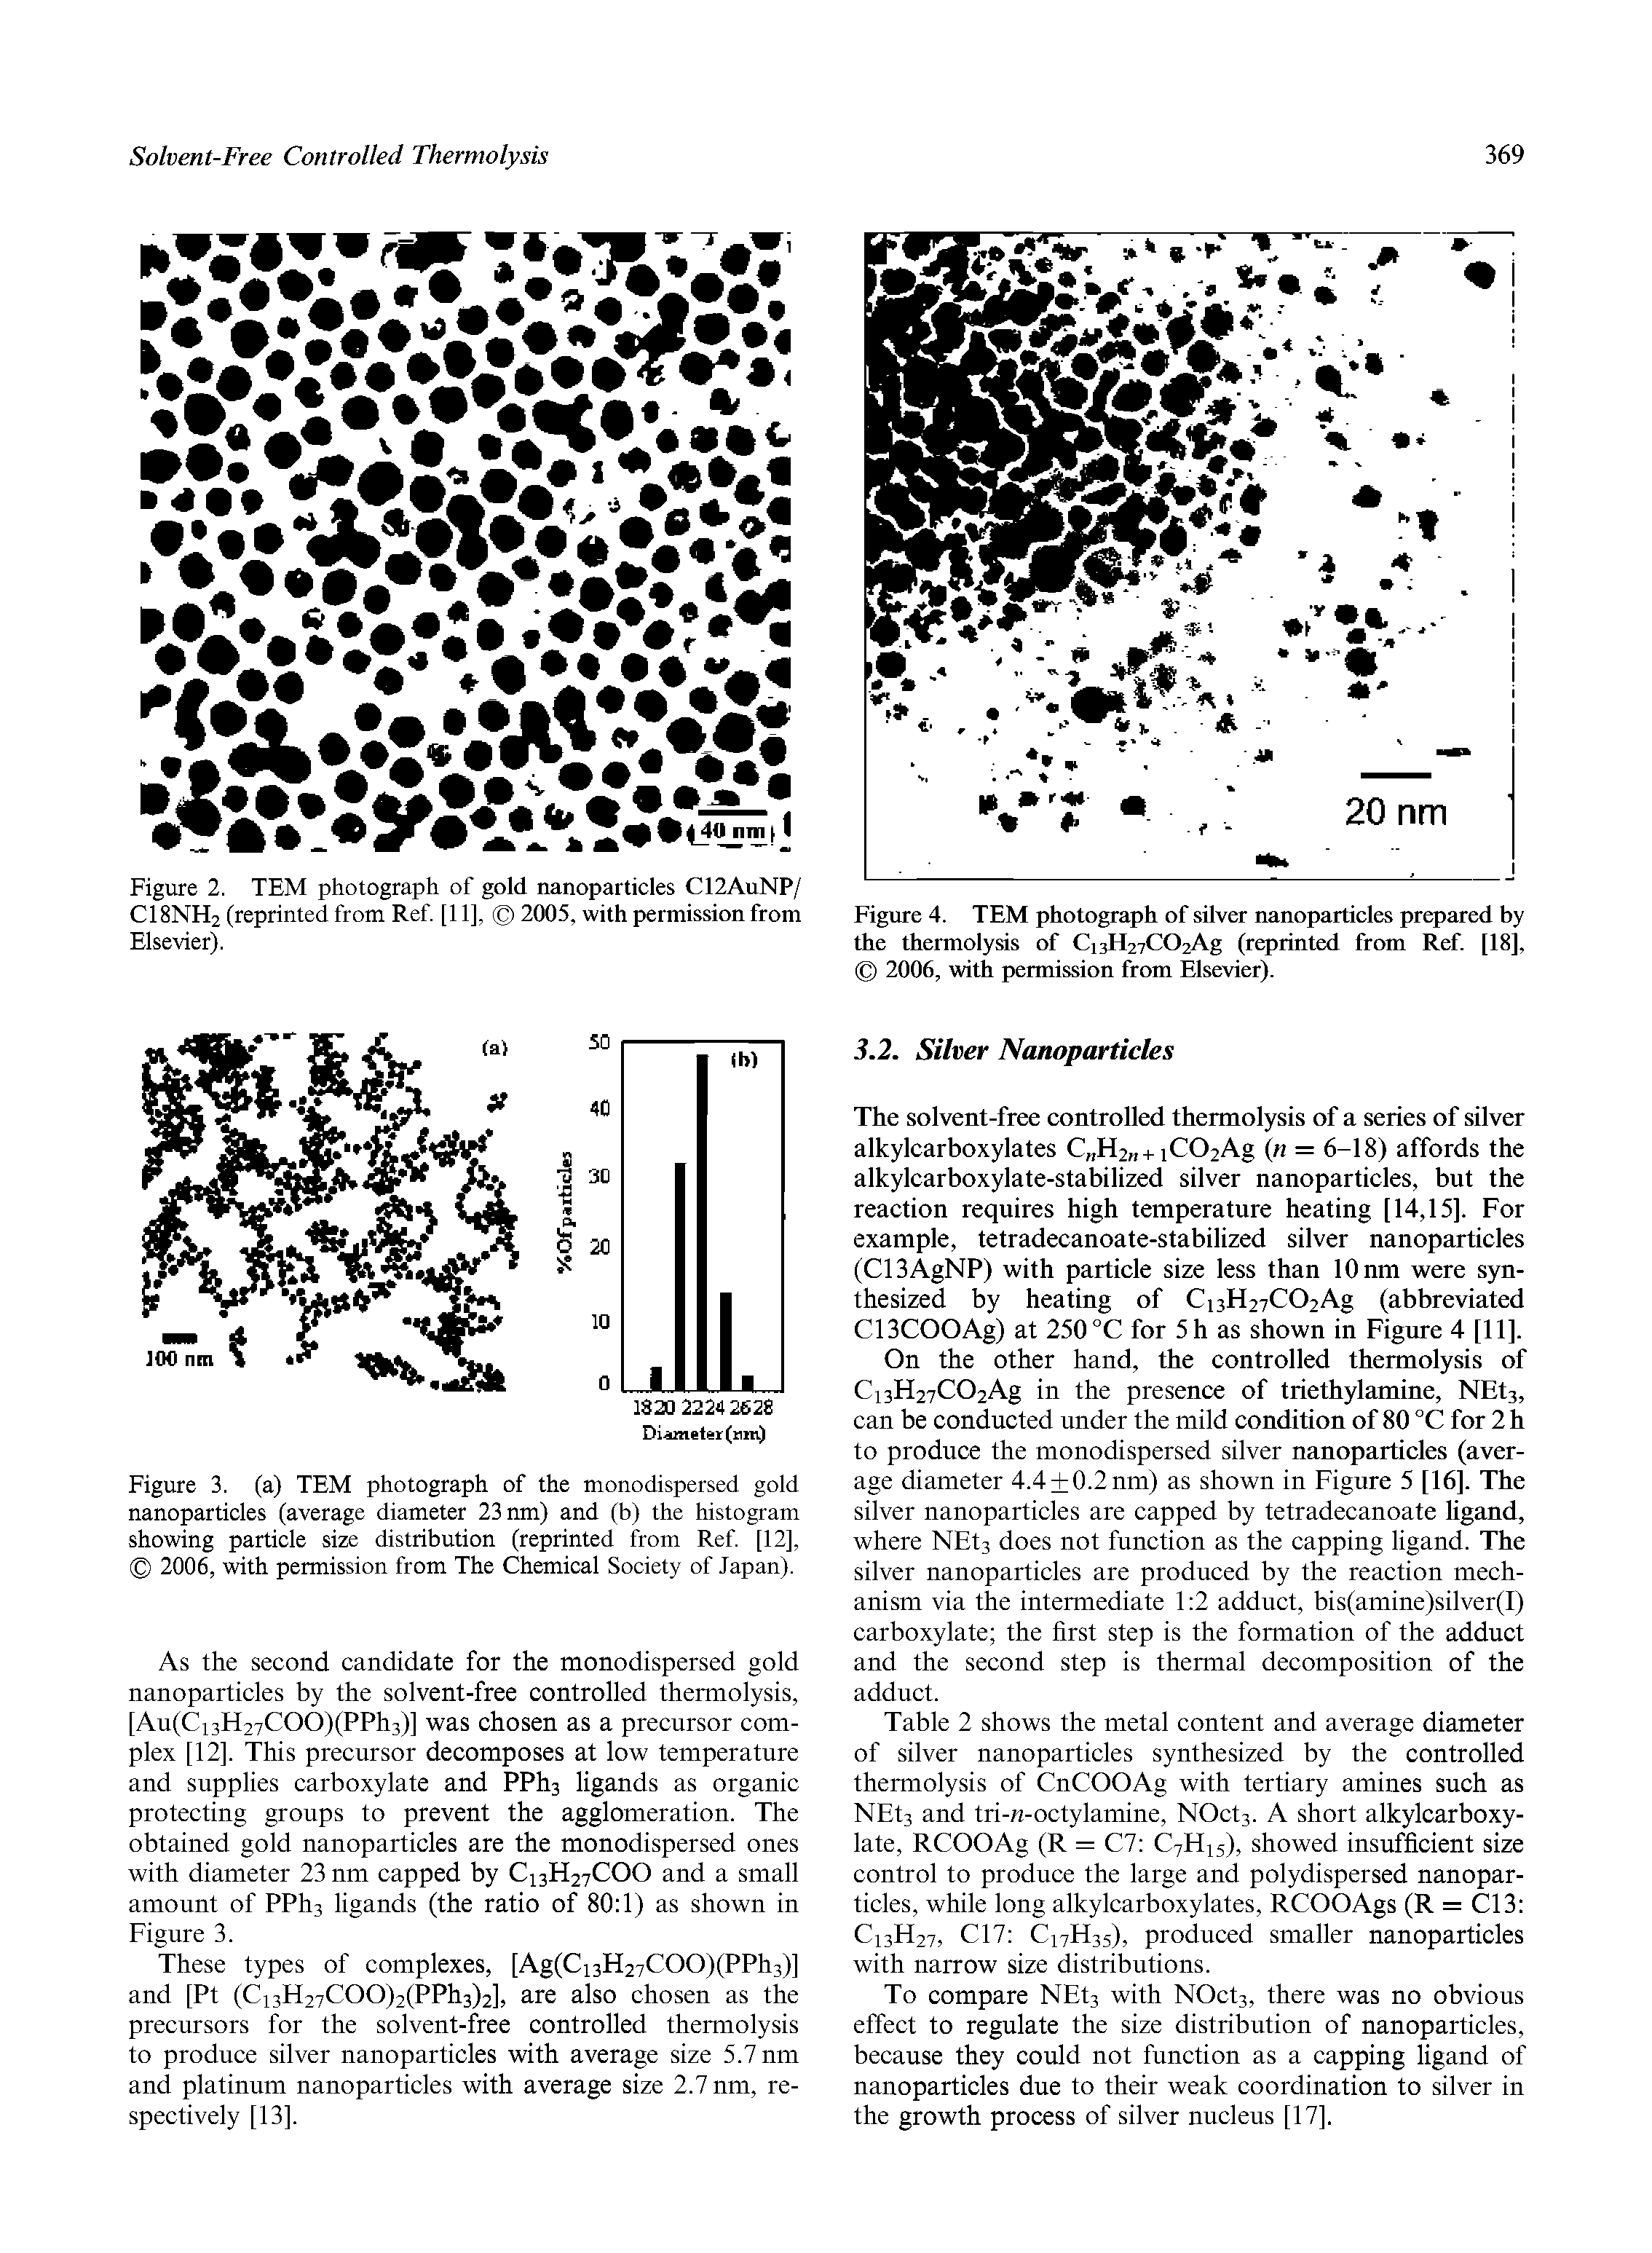 Figure 4. TEM photograph of silver nanoparticles prepared by the thermolysis of Ci3H27C02Ag (reprinted from Ref. [18], 2006, with permission from Elsevier).